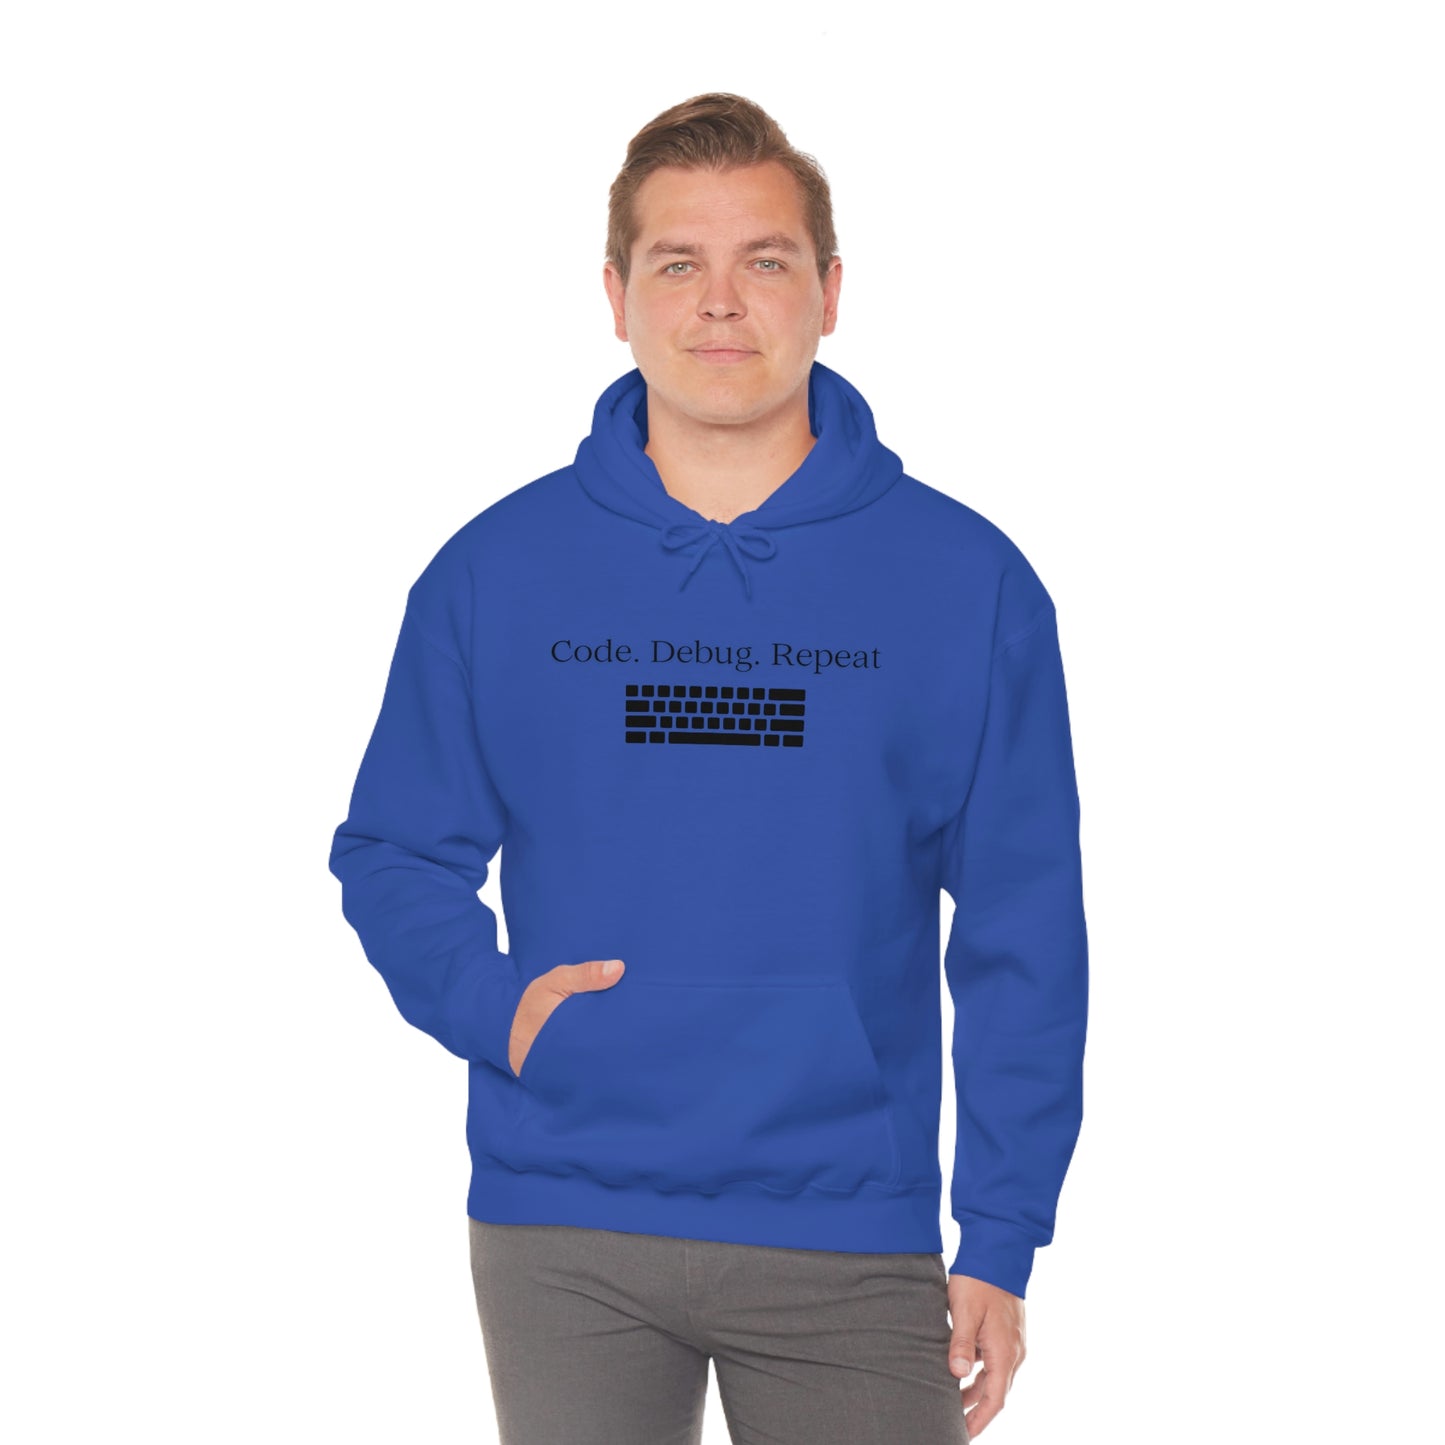 Wrap Yourself in Style and Functionality with Our Code.Debug.Repeat Unisex Heavy Blend™ Hooded Sweatshirt